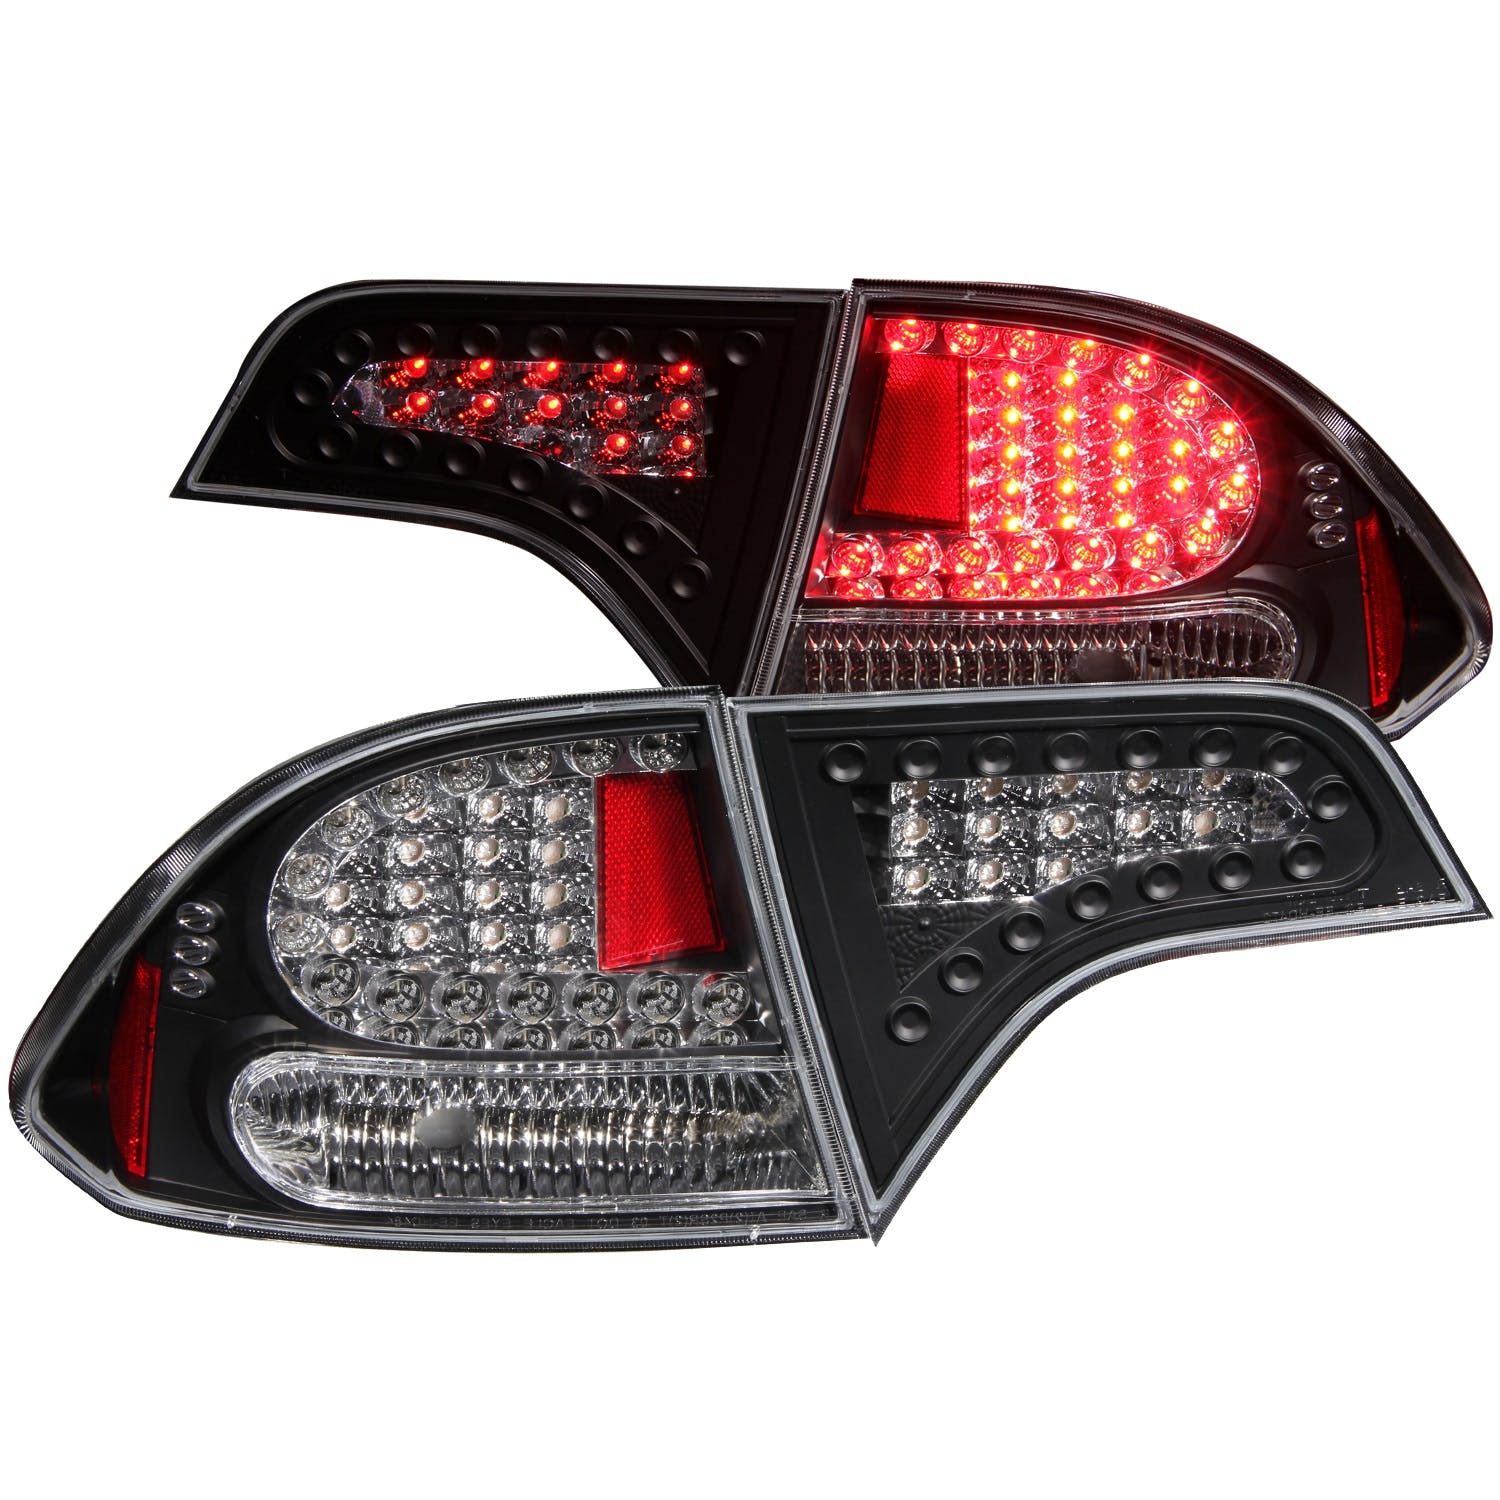 AnzoUSA 321152 LED Taillights Black